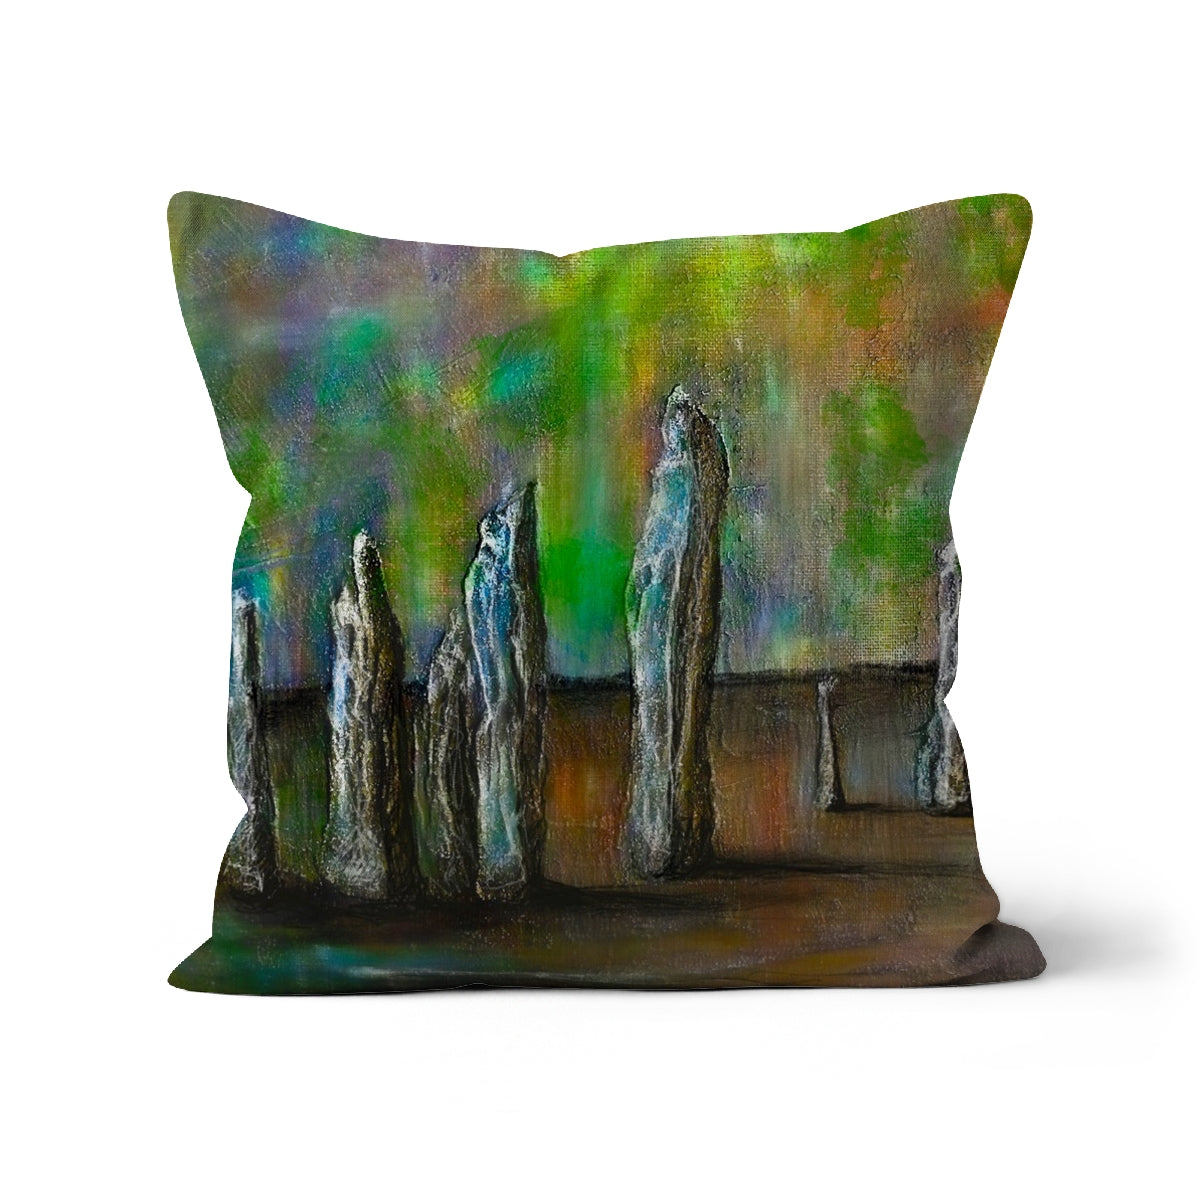 Callanish Northern Lights Art Gifts Cushion-Cushions-Hebridean Islands Art Gallery-Linen-18"x18"-Paintings, Prints, Homeware, Art Gifts From Scotland By Scottish Artist Kevin Hunter